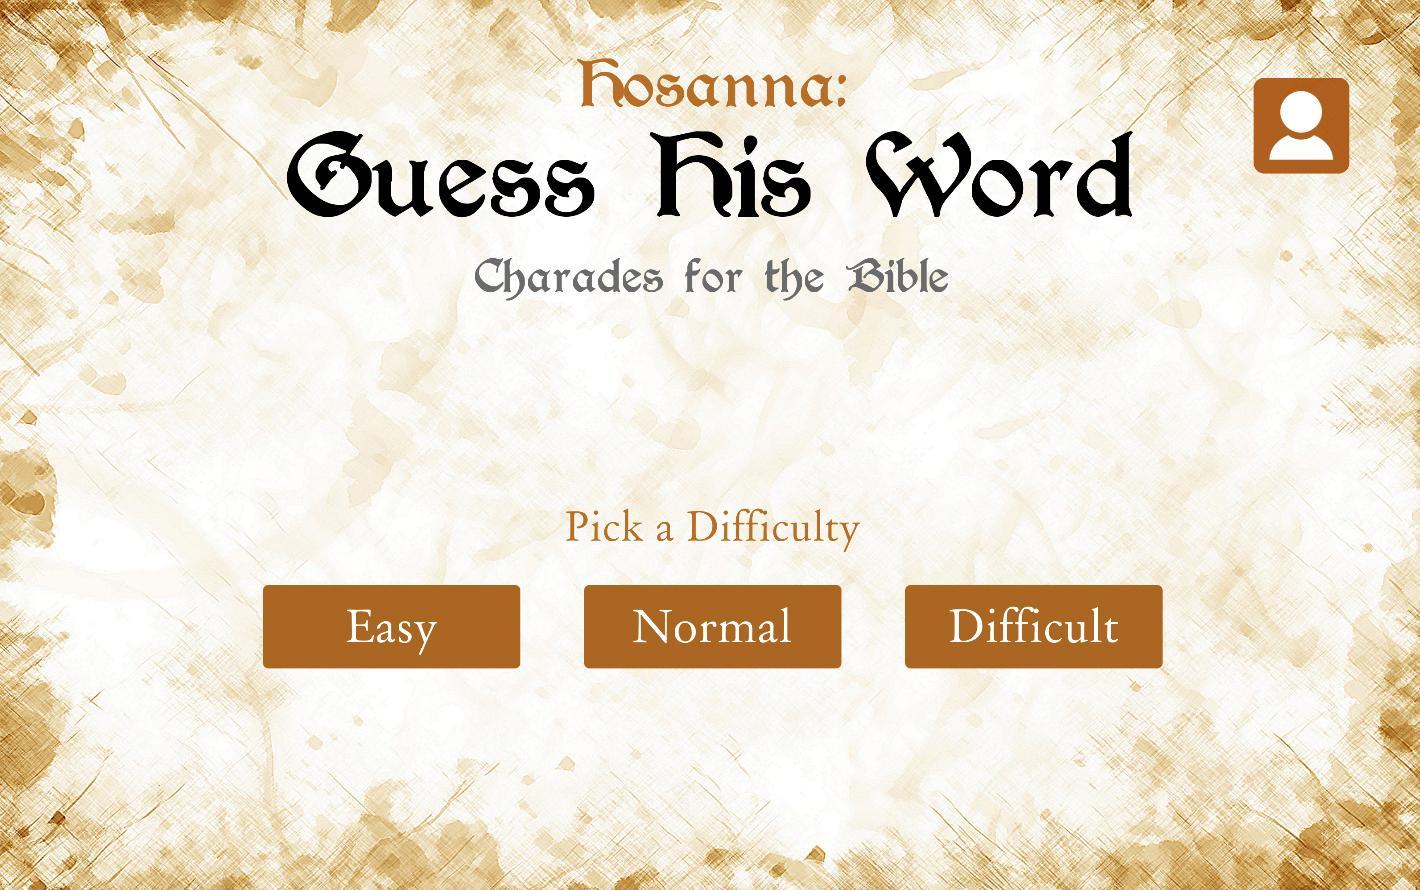 Guess word слово. Guess the Word. Guess слово. Hosanna. Guess my Word.